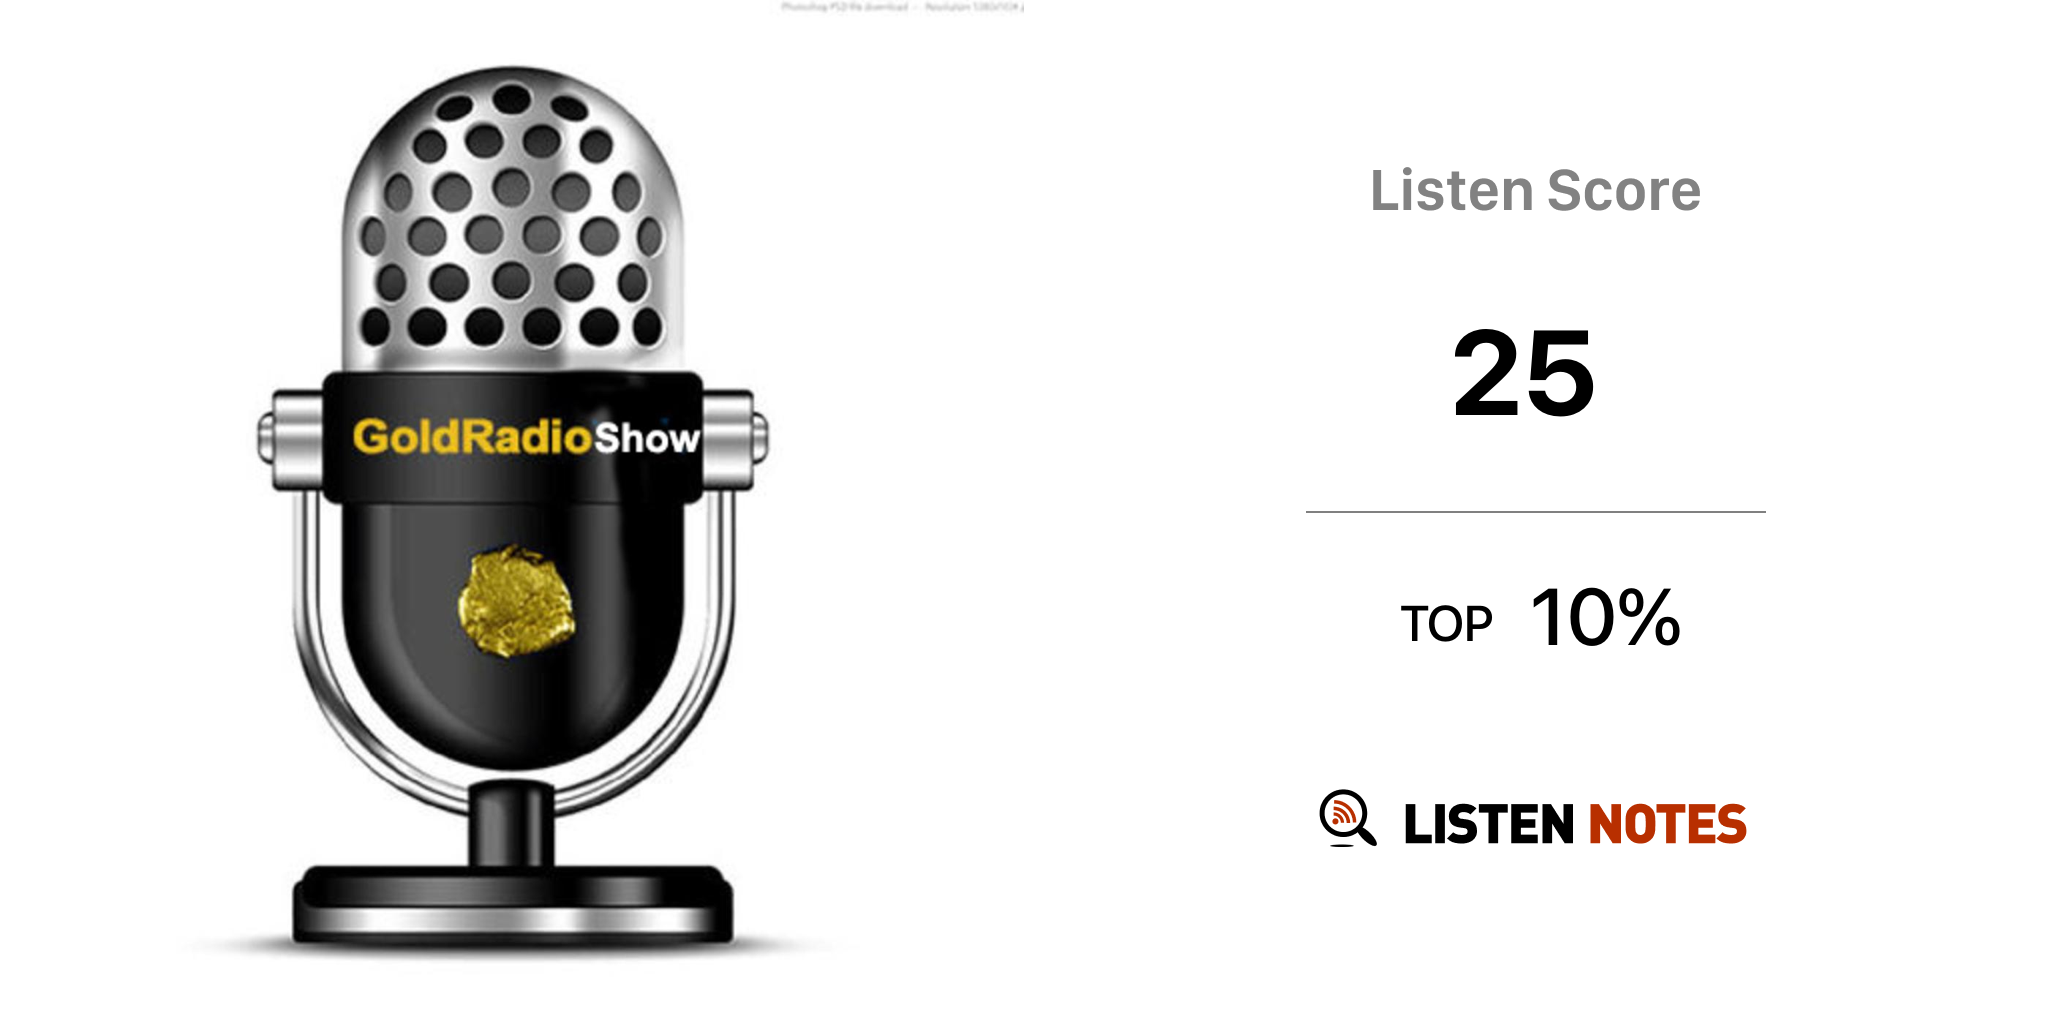 Listen to GoldRadioShow:Gold Prospecting Talk Show podcast